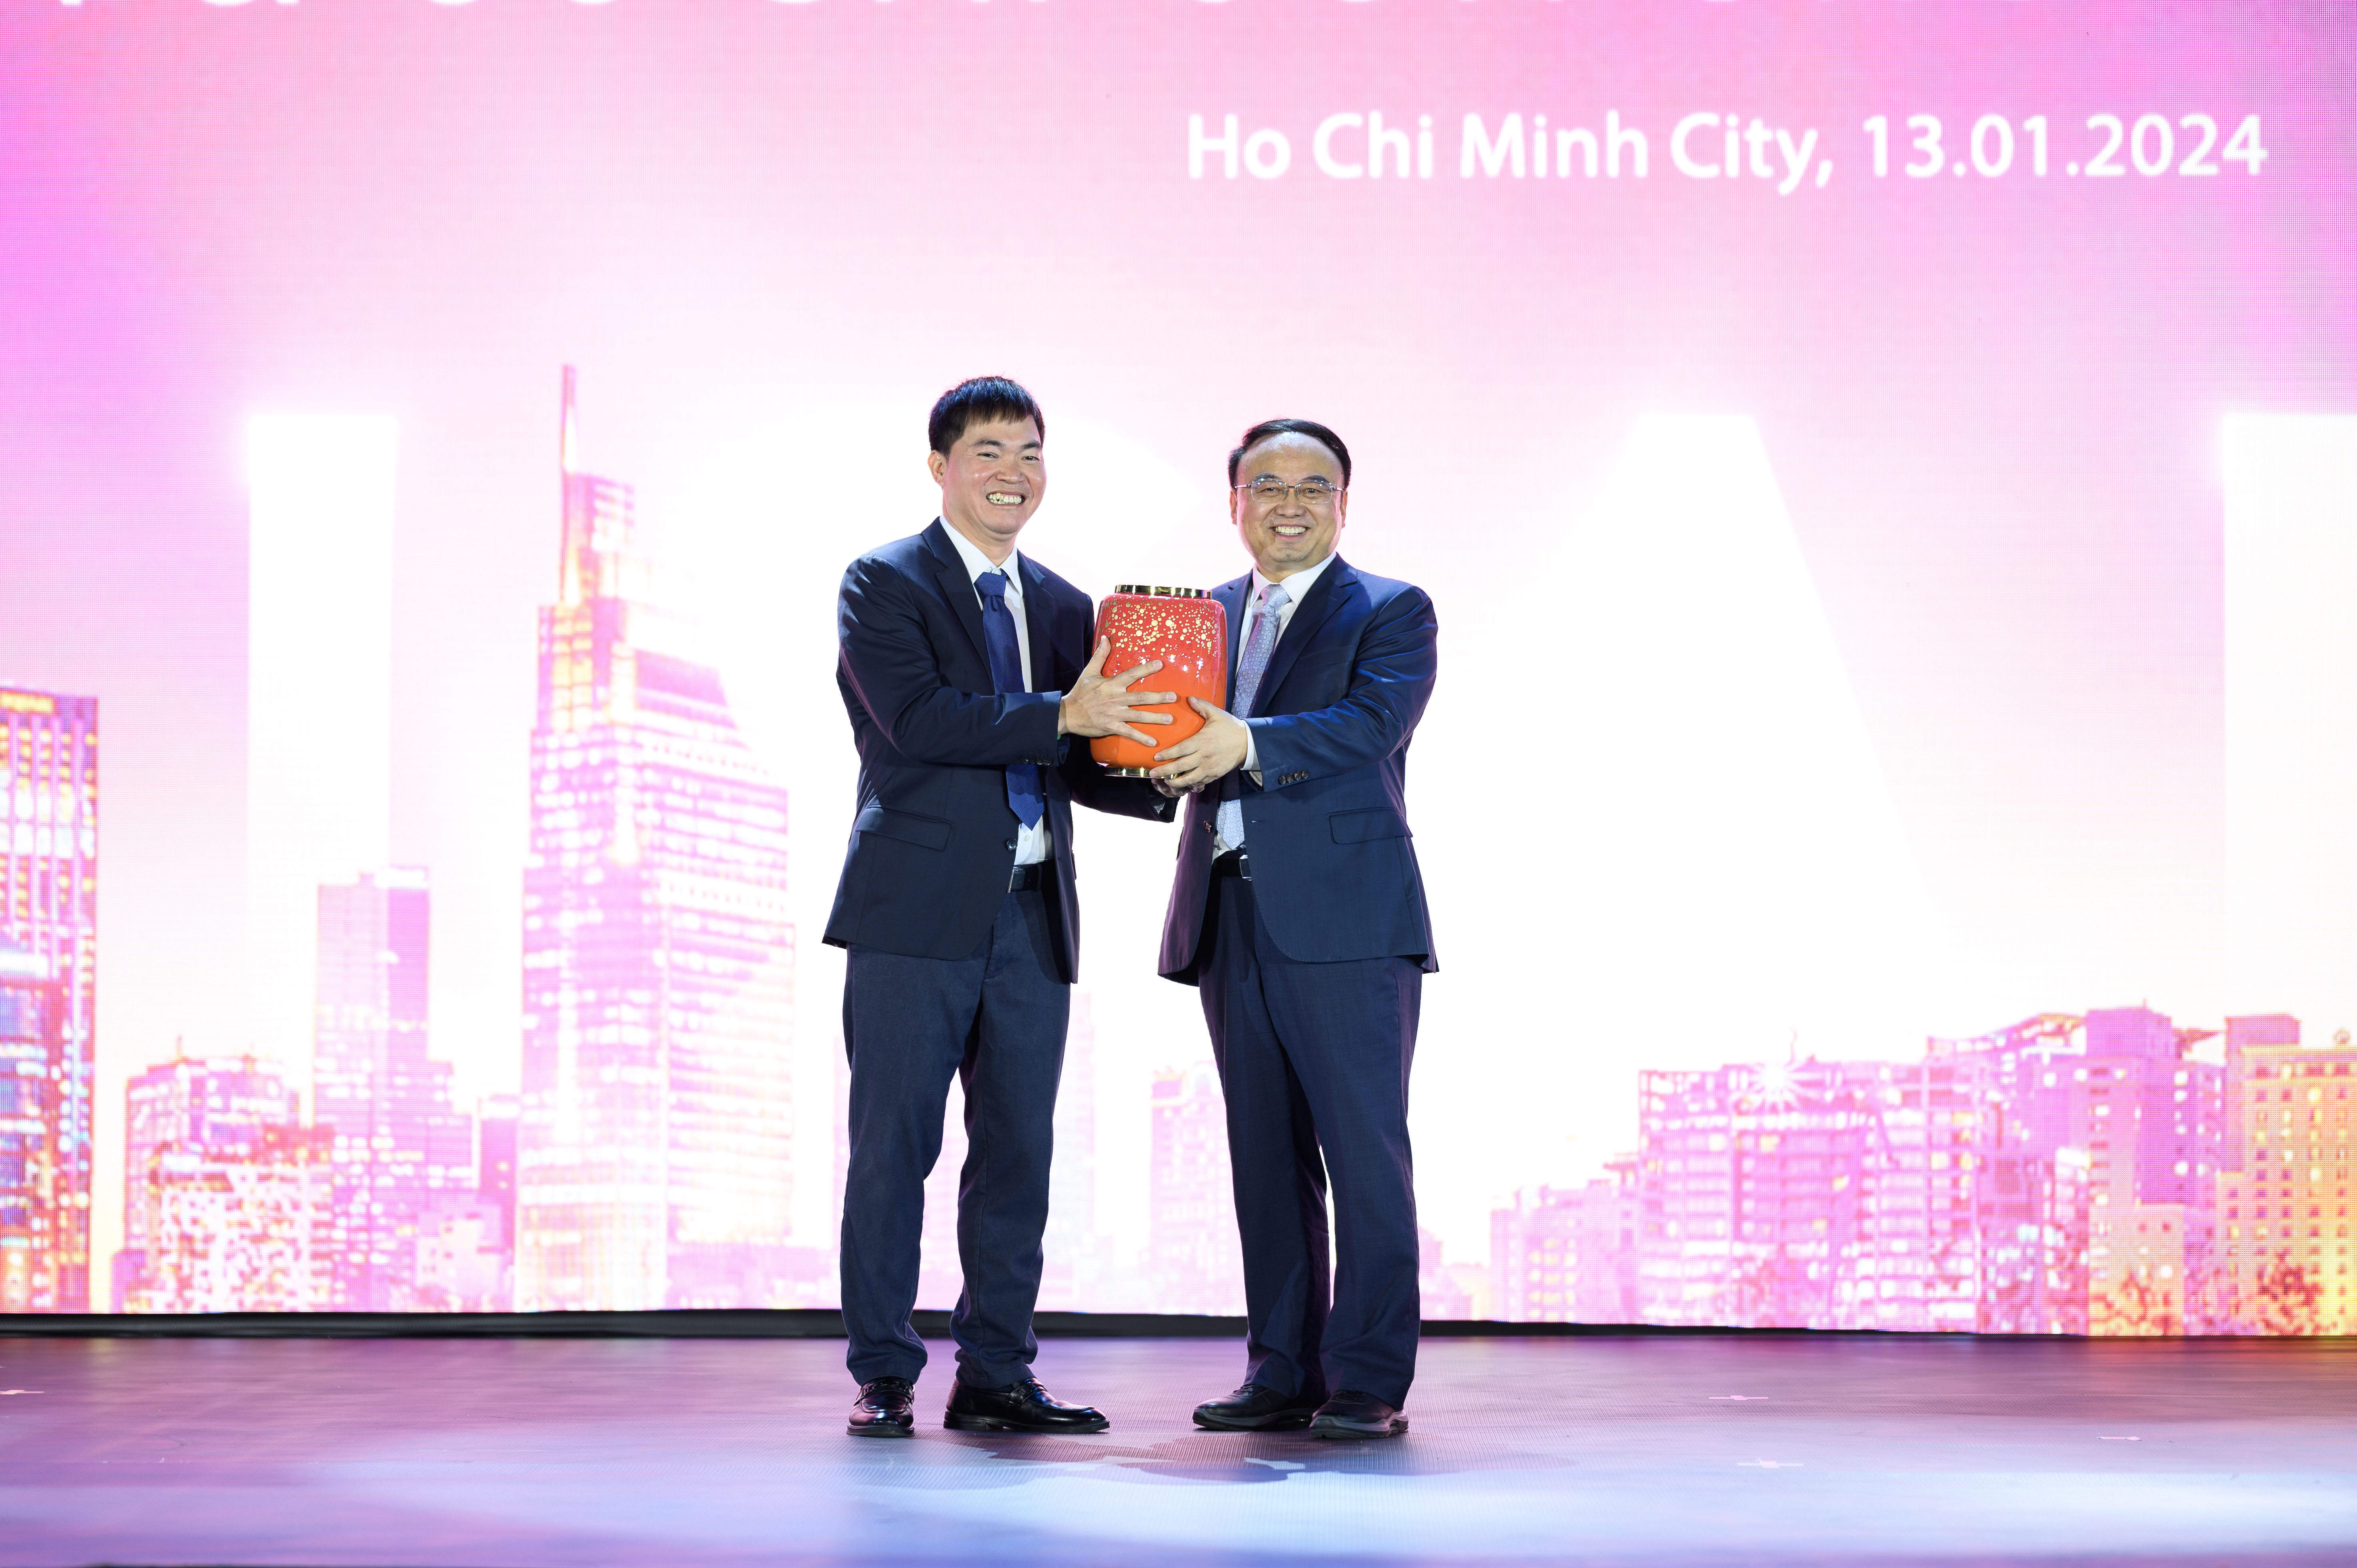 Tasco and Geely executives hold a gift at the launch event in Ho Chi Minh City, January 13, 2024.